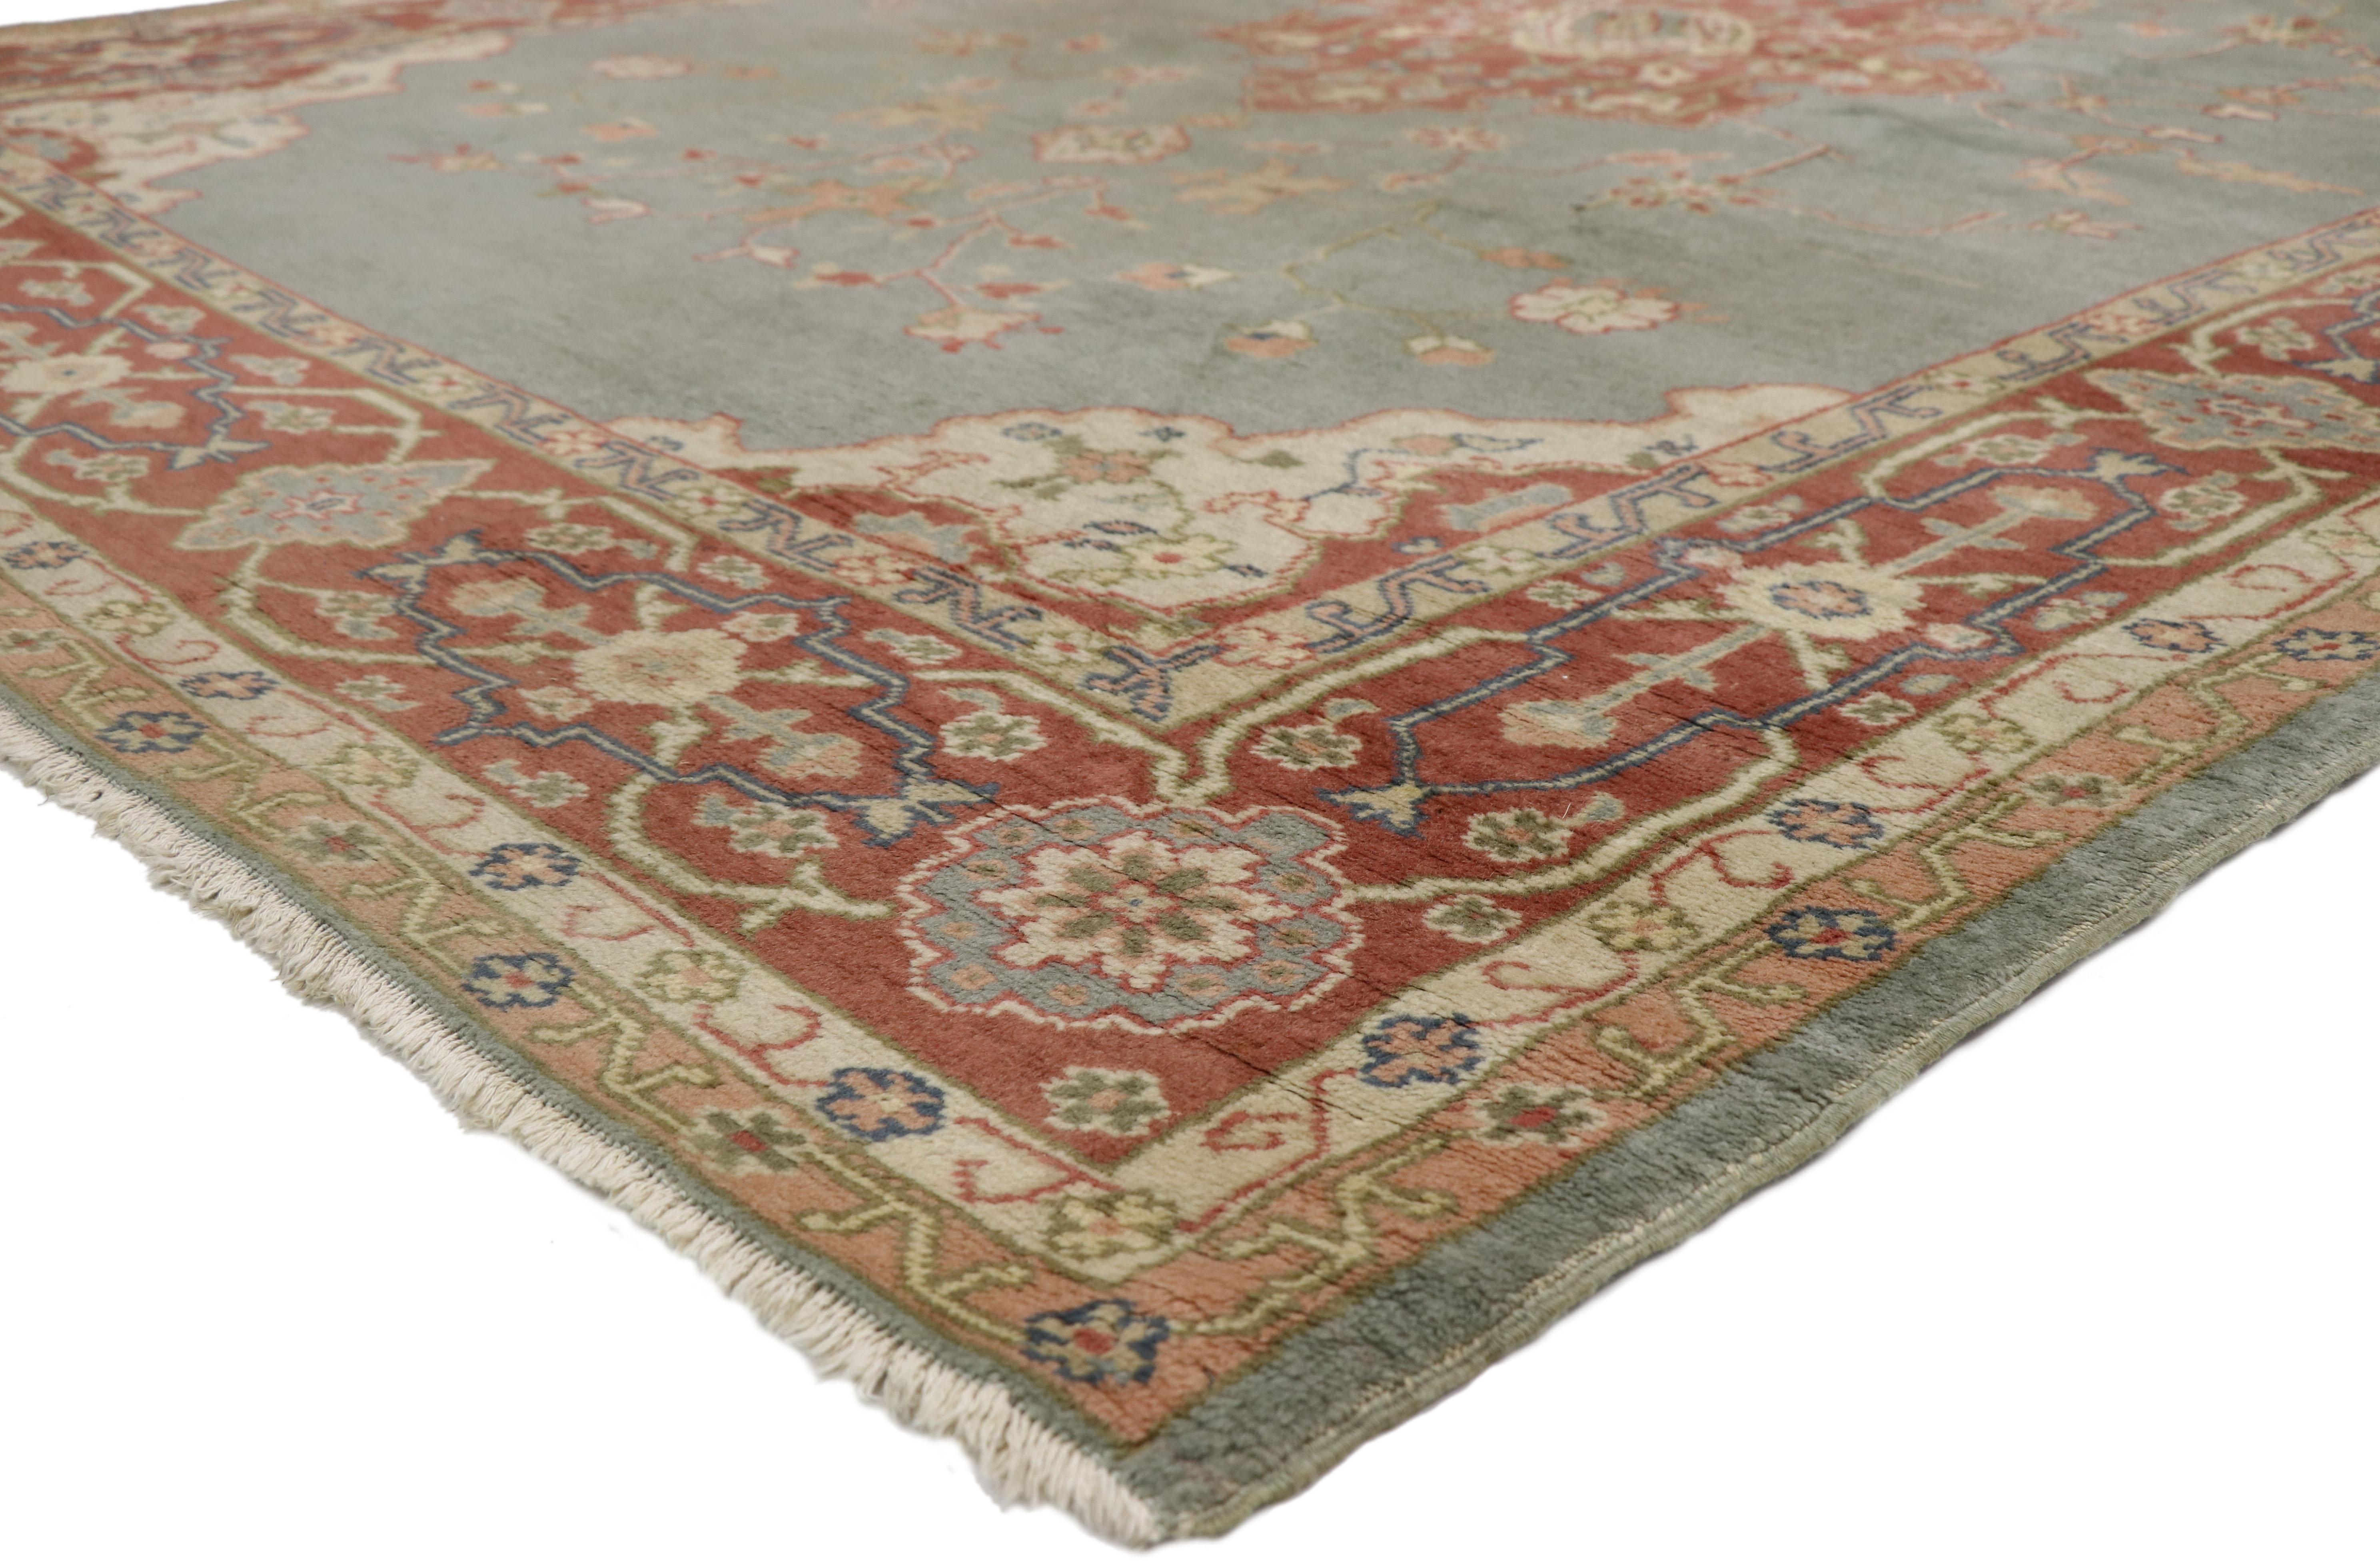 77357, distressed antique Turkish Oushak rug with rustic Georgian and Arts & Crafts style. A beautiful combination of warm terracotta tones and soft bluish-grey hues, this hand knotted wool distressed antique Turkish Oushak rug creates a delicate